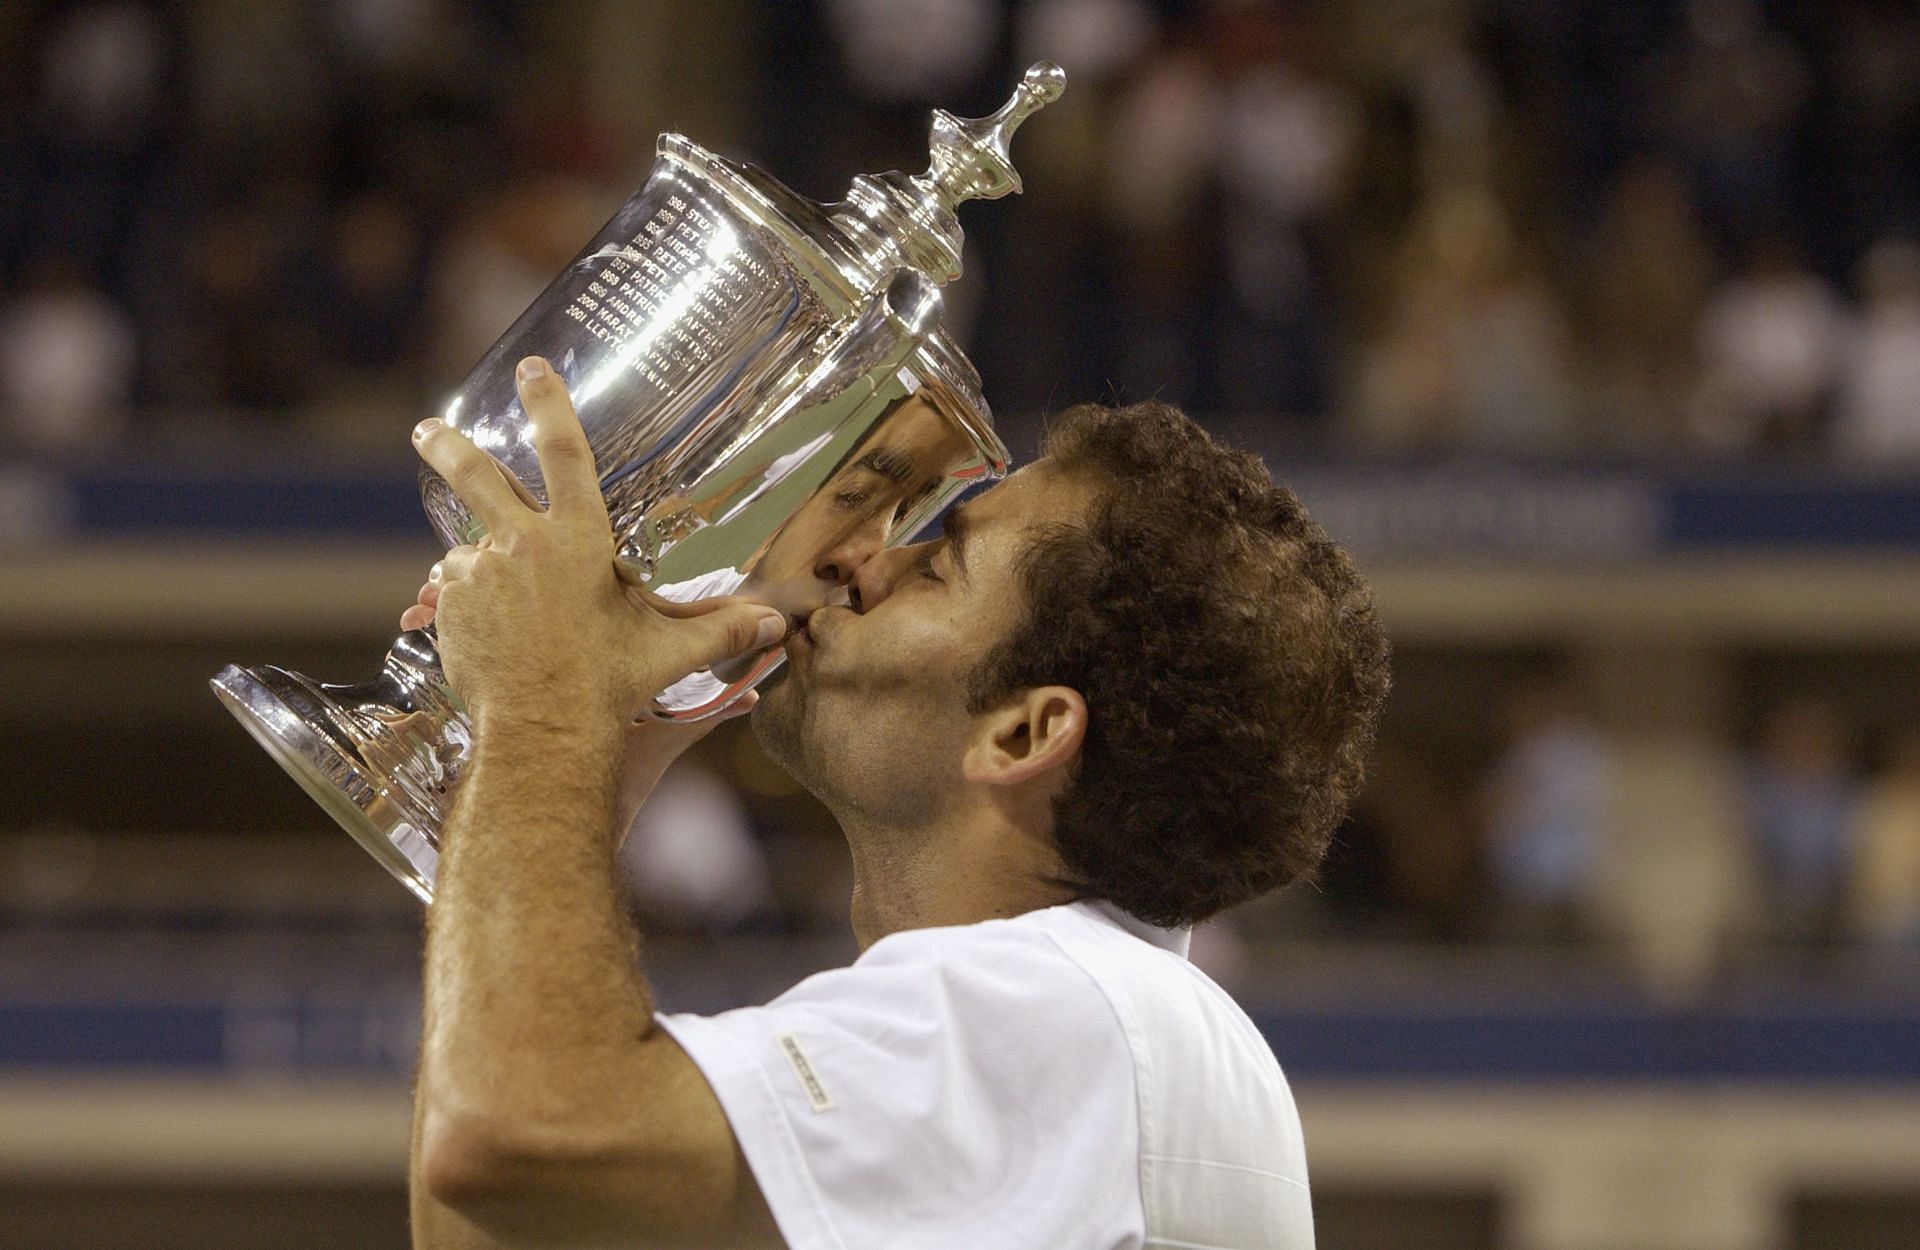 Pete Sampras celebrates winning the 2002 US Open against Andre Agassi - Getty Images